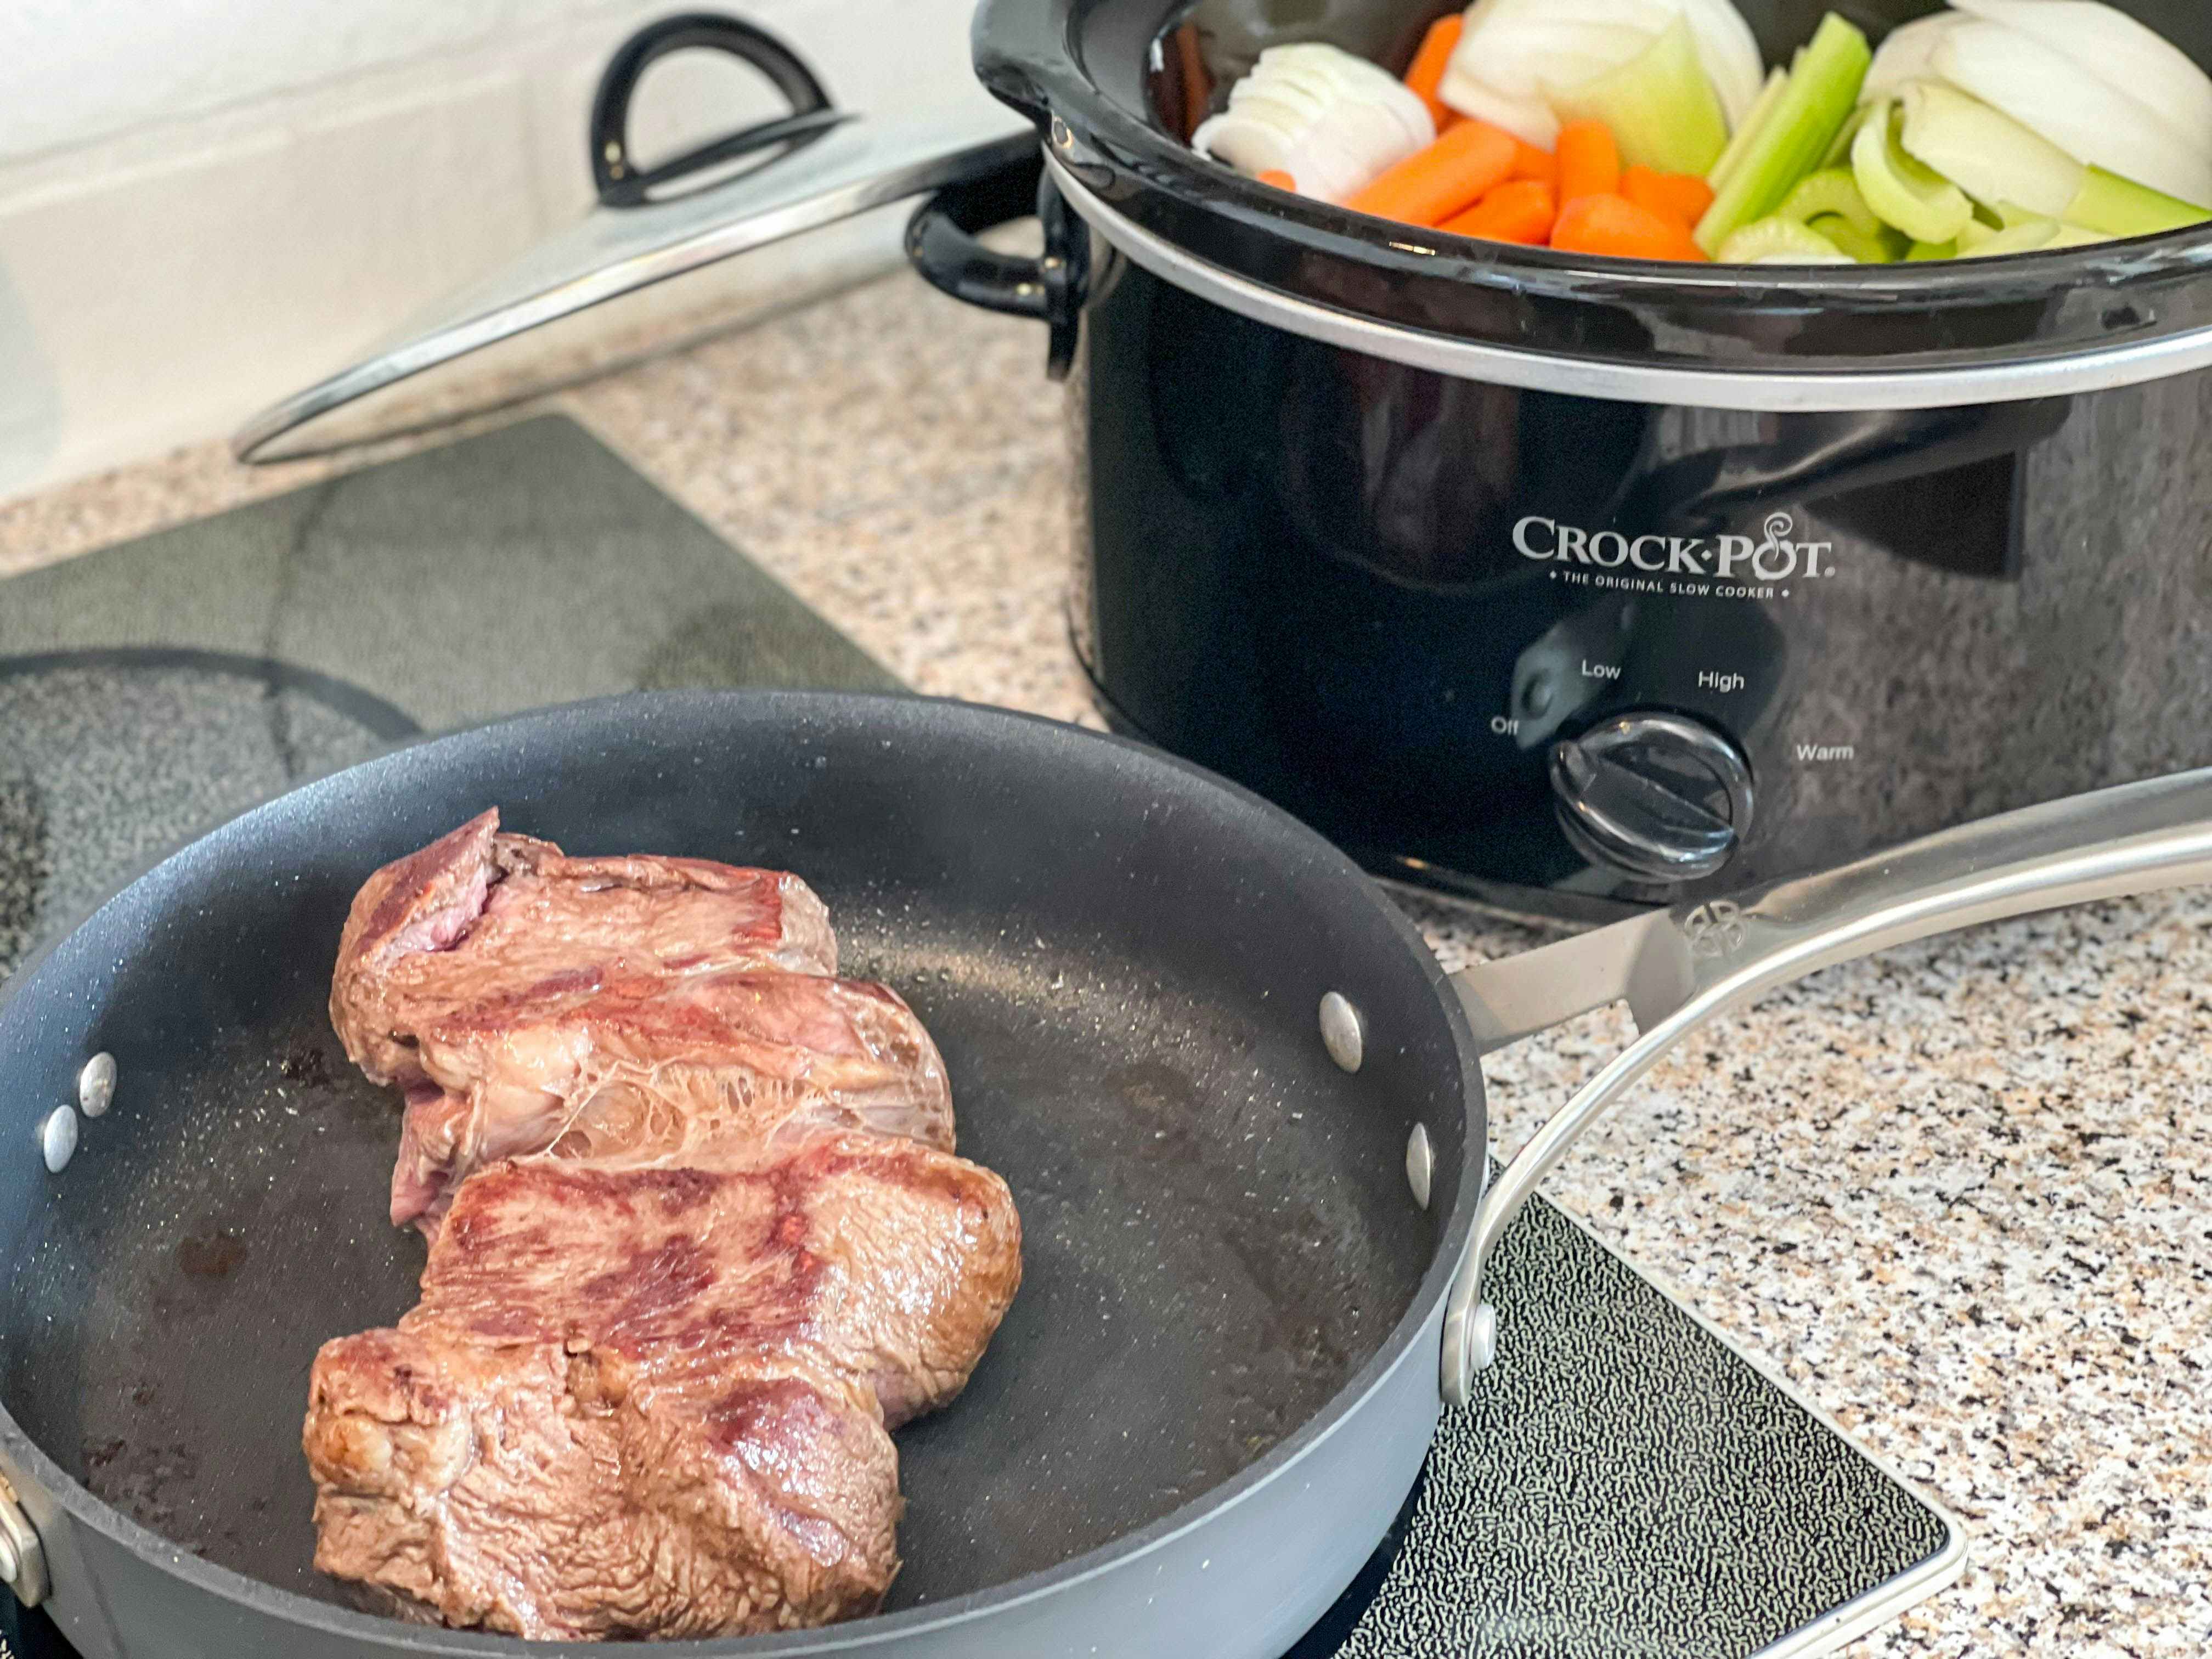 The Easy Trick To Divide Your Slow Cooker And Make 2 Things At Once